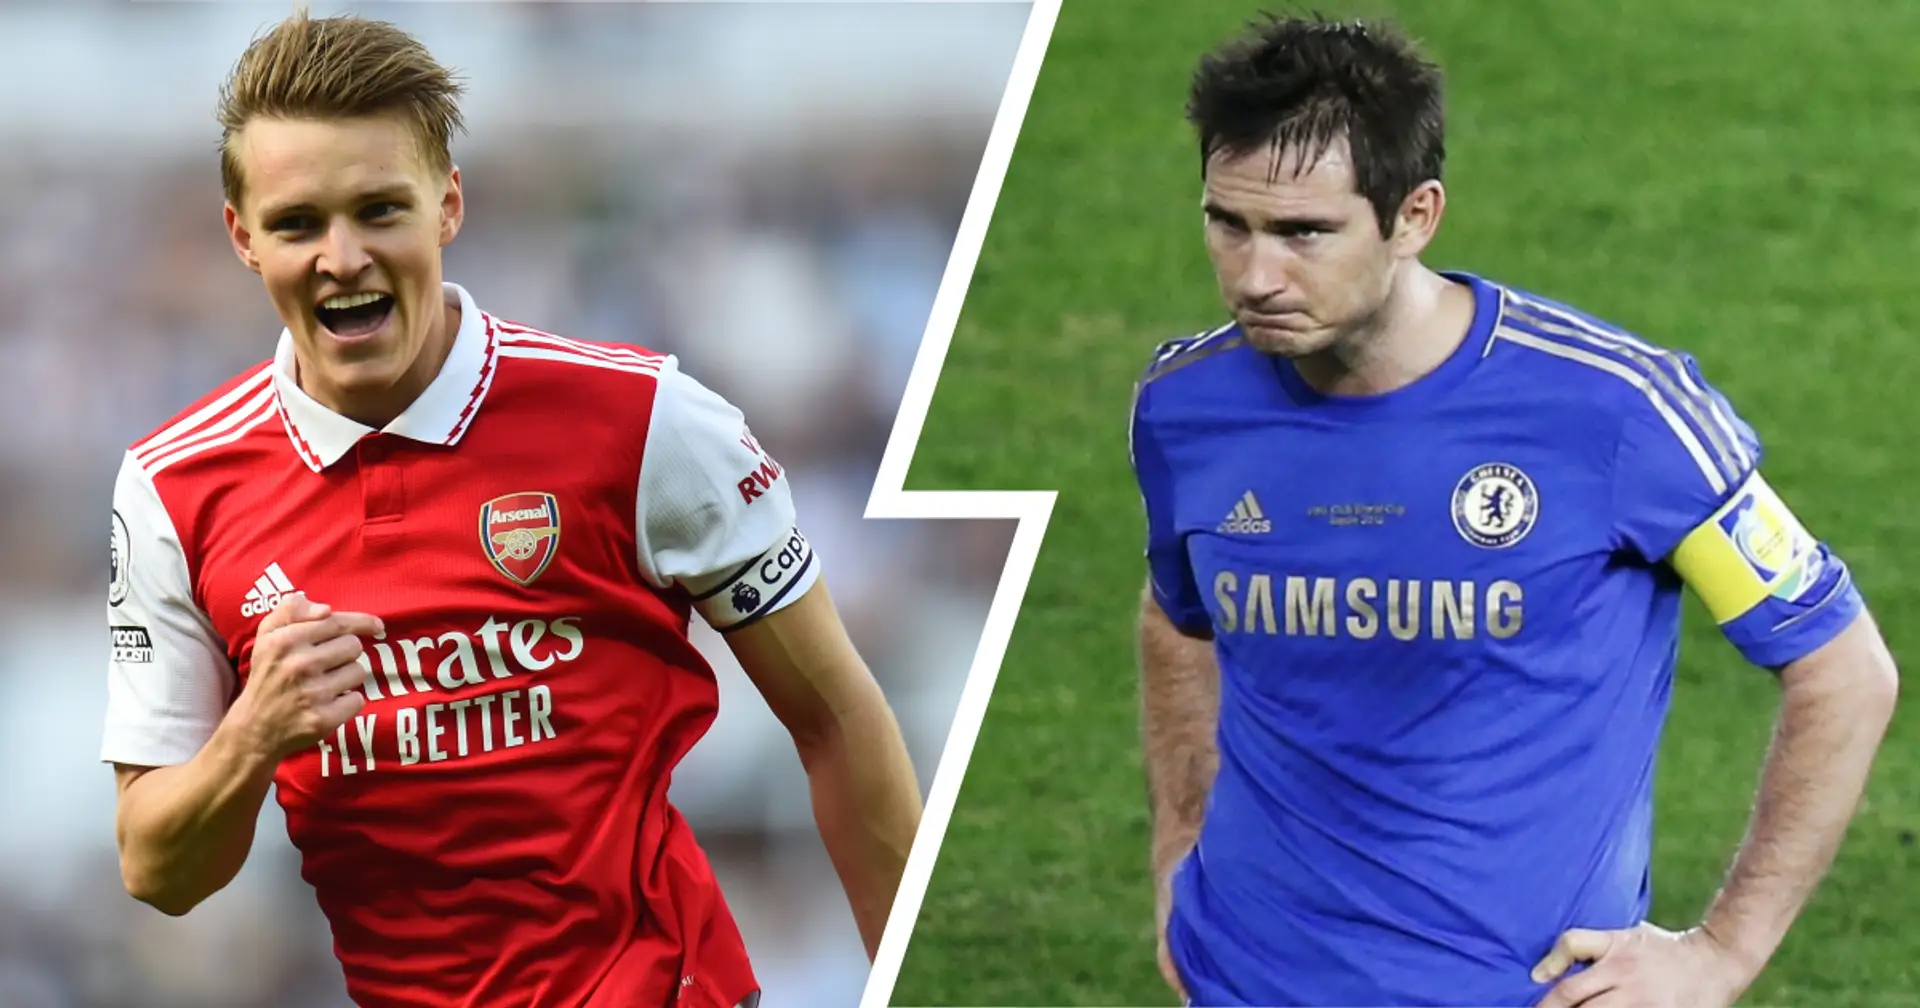 'Look at those numbers! My f*cking captain!': Arsenal fans celebrate Odegaard surpassing one of Lampard's personal records